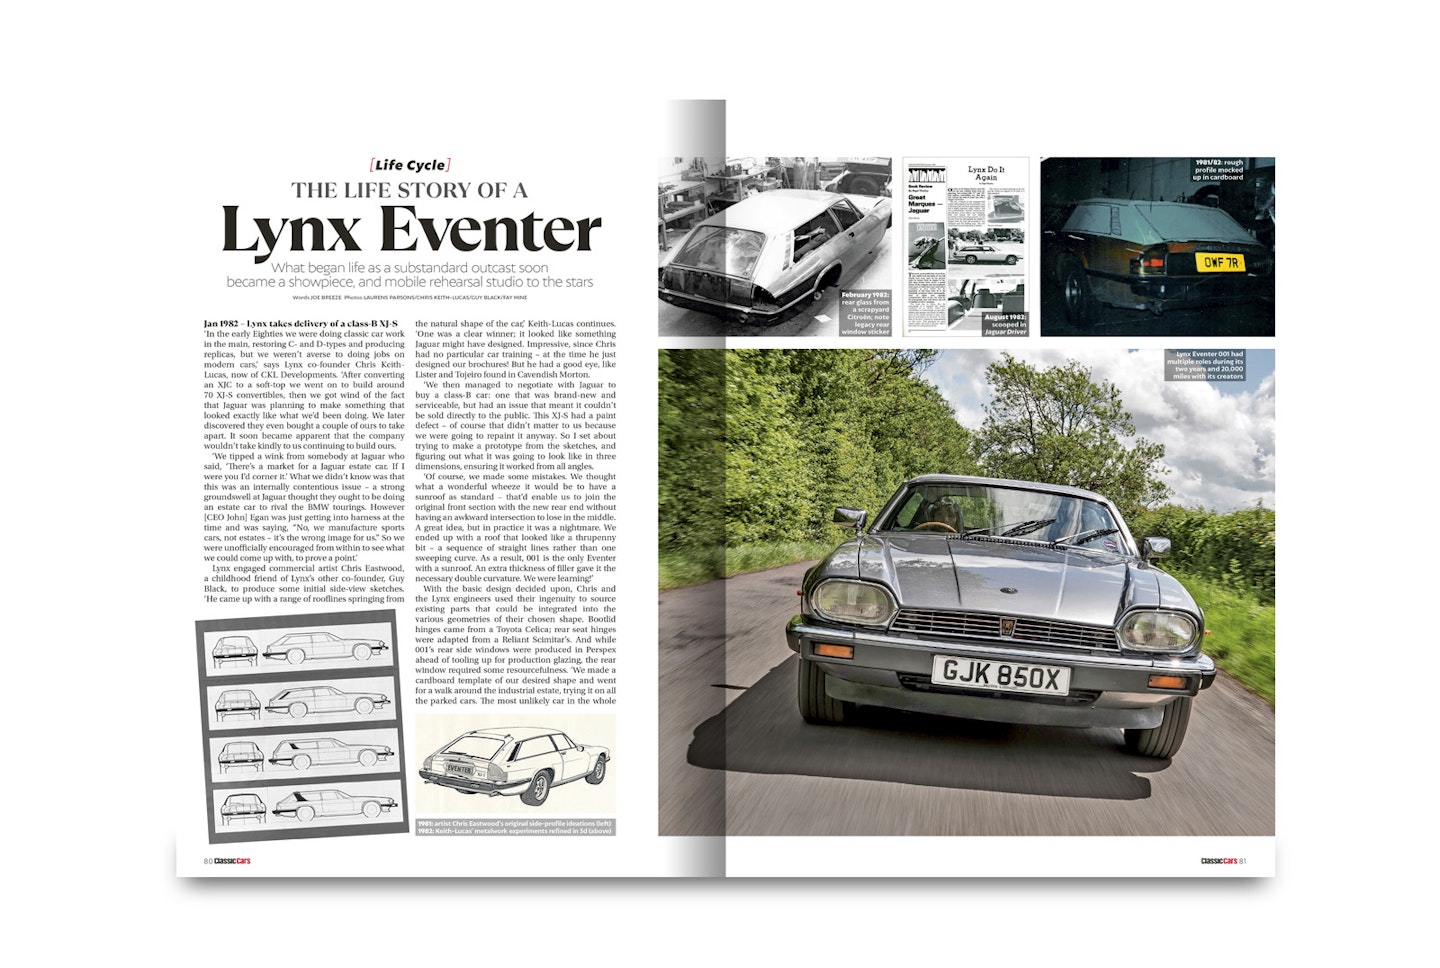 Rock 'n' roll life story of the prototype Lynx Eventer